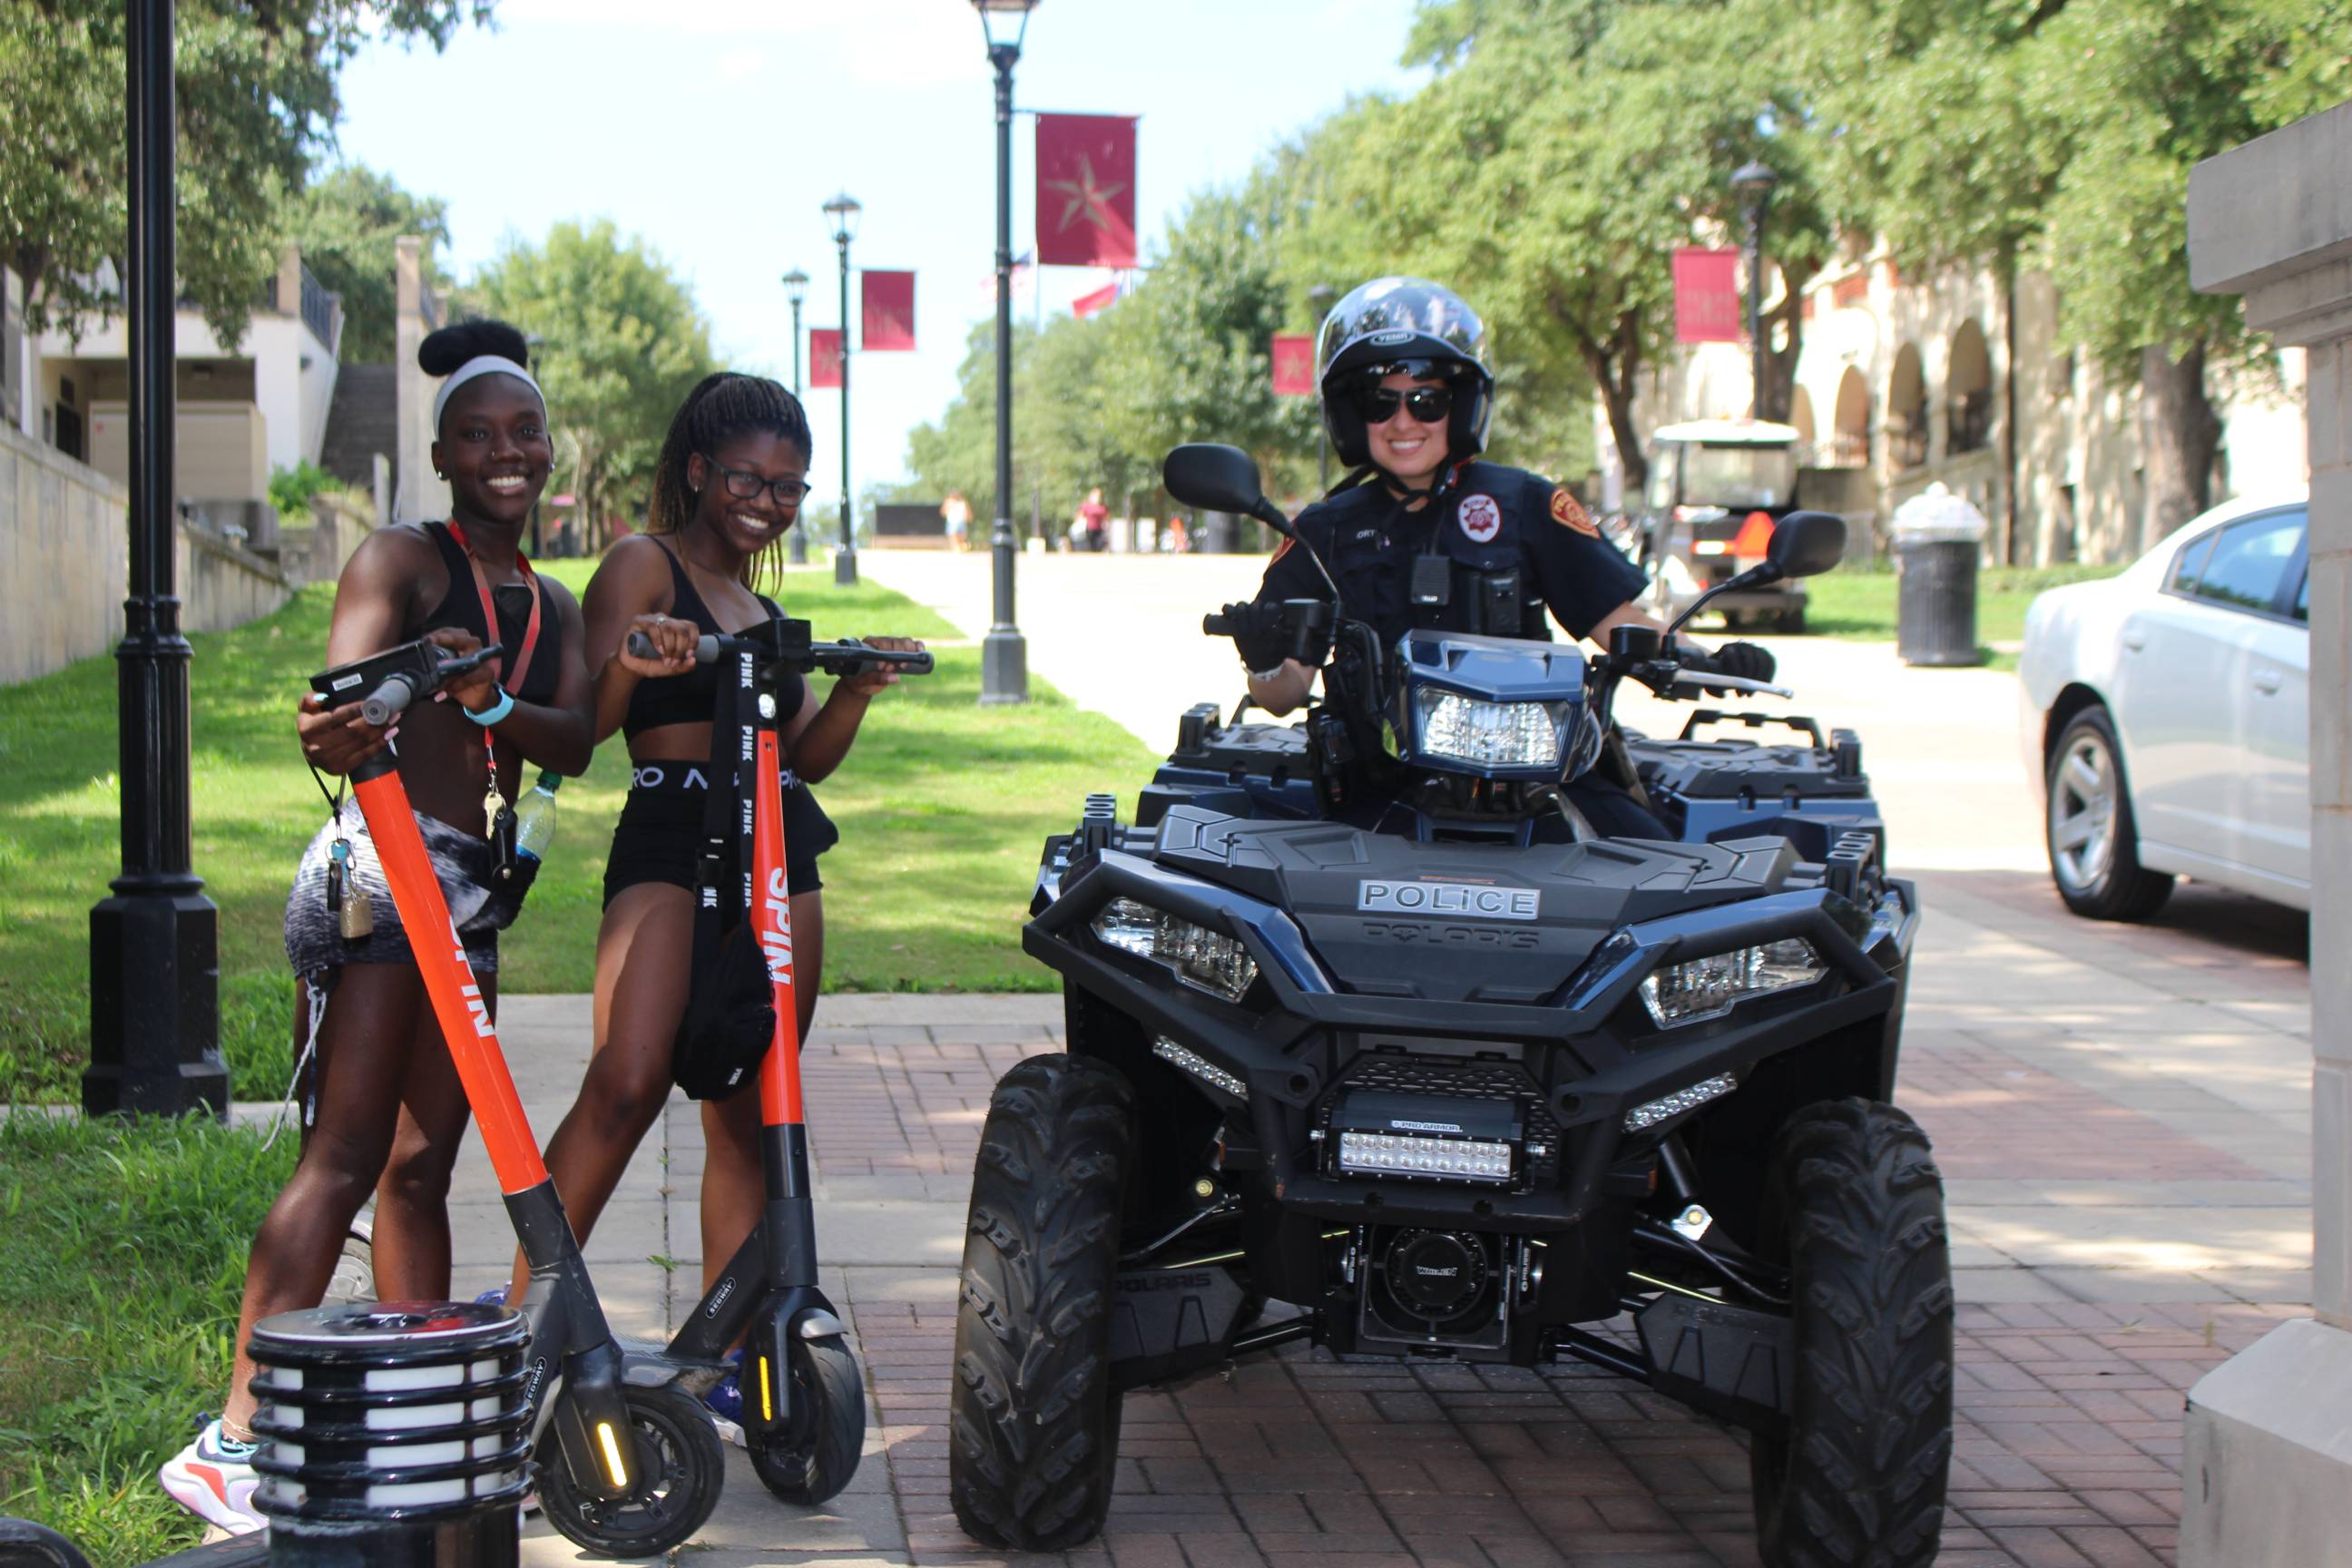 Girls on Scooters with Officer on ATV